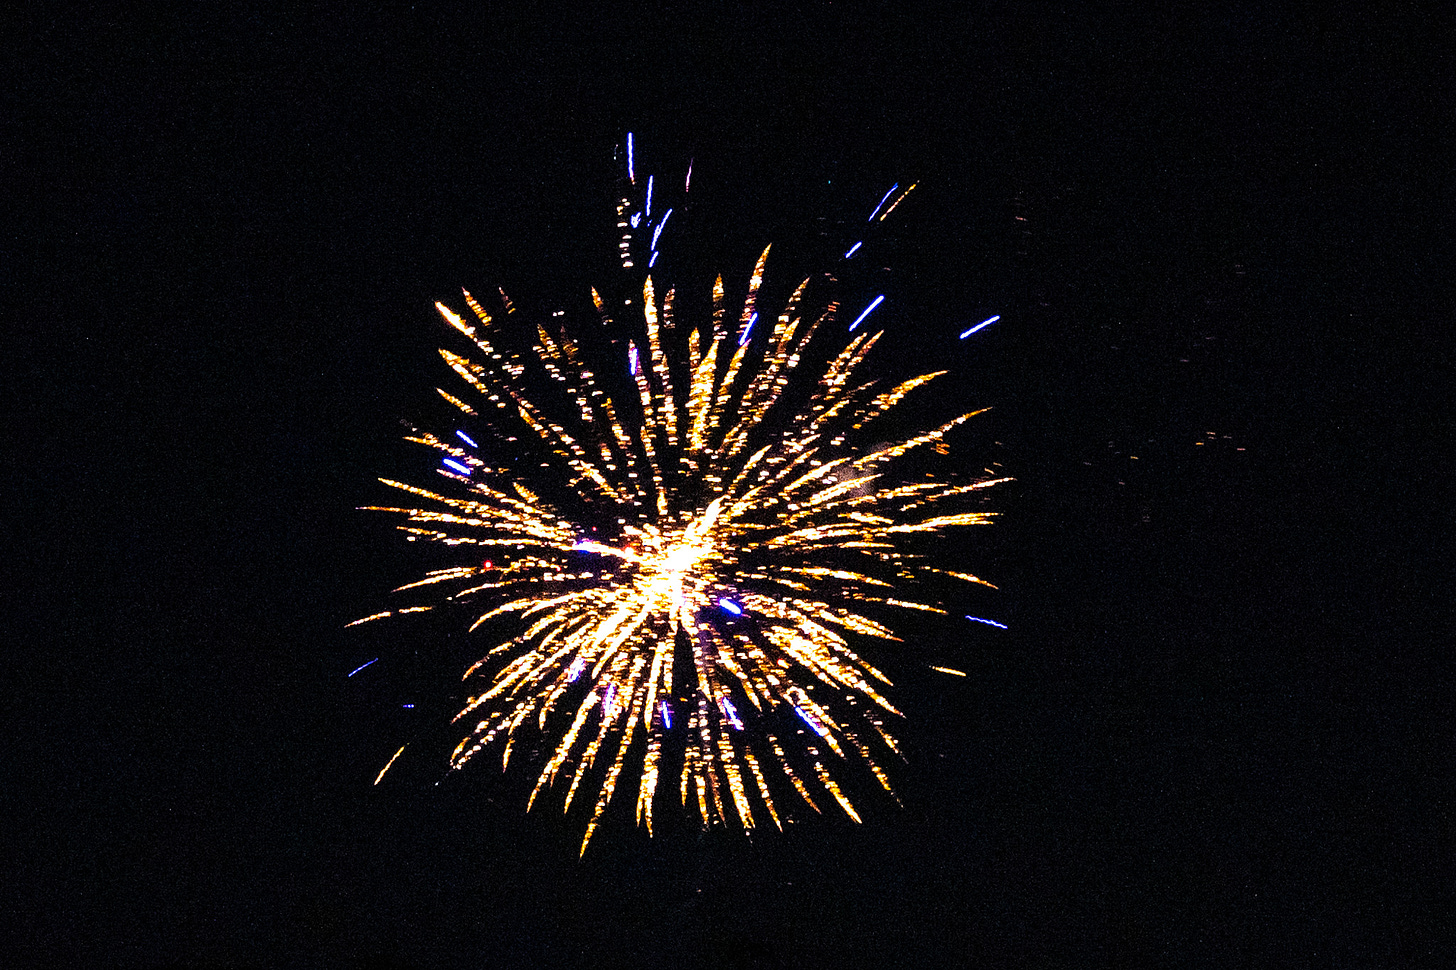 Fireworks exploding in blues and golds against a black sky